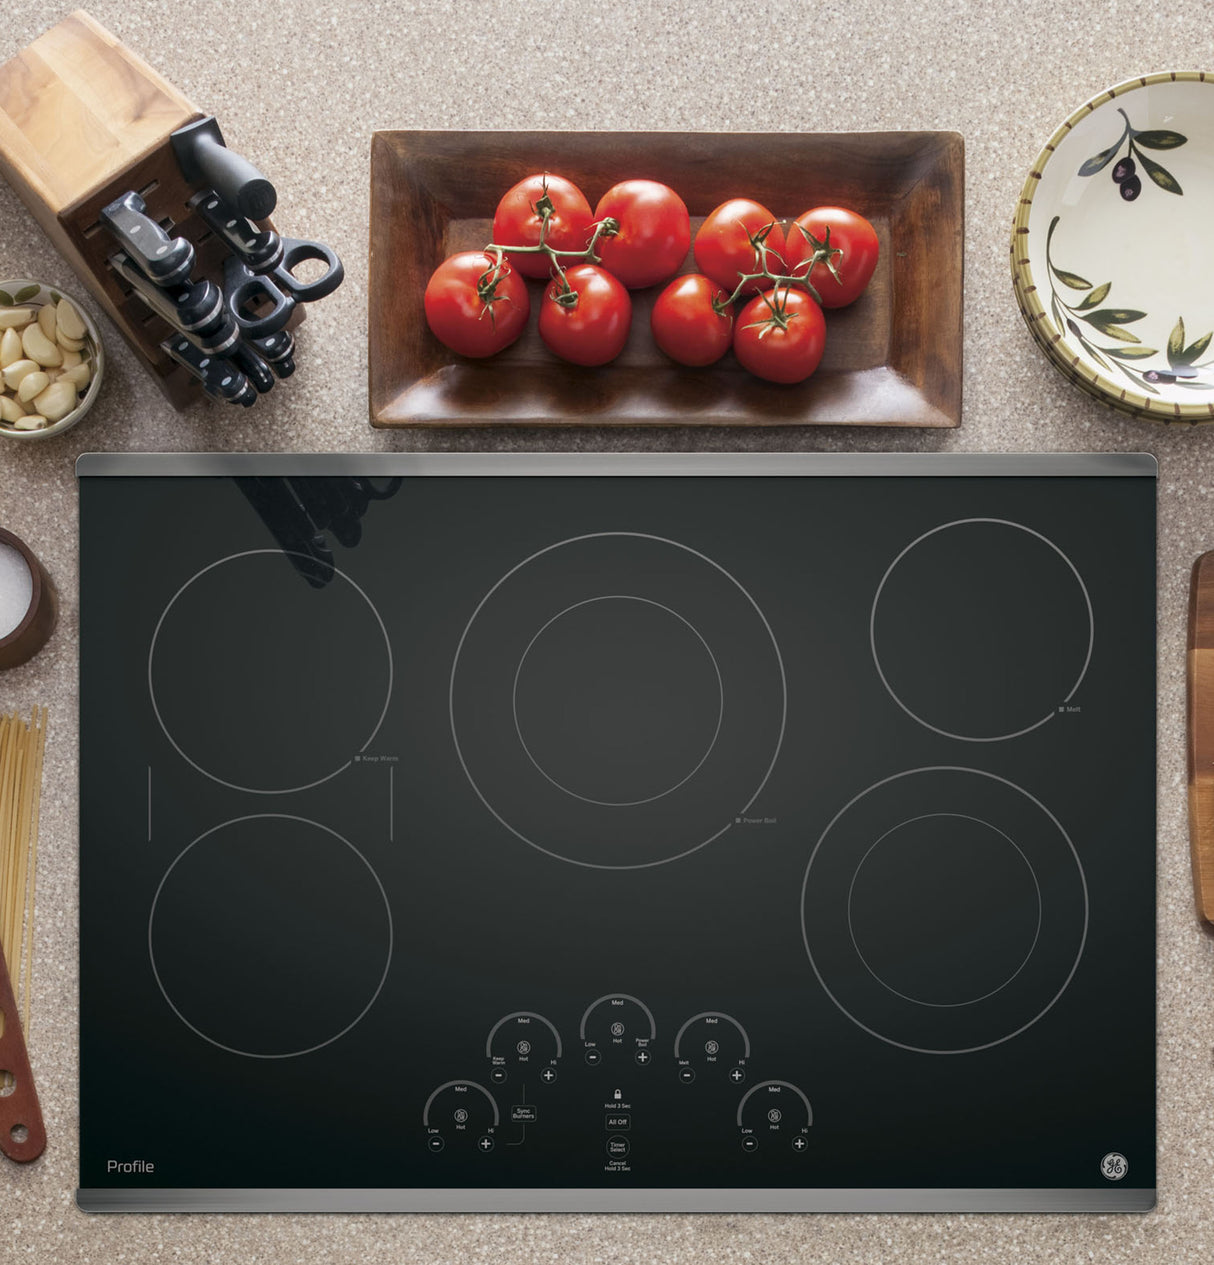 GE Profile(TM) 30" Built-In Touch Control Electric Cooktop - (PP9030SJSS)